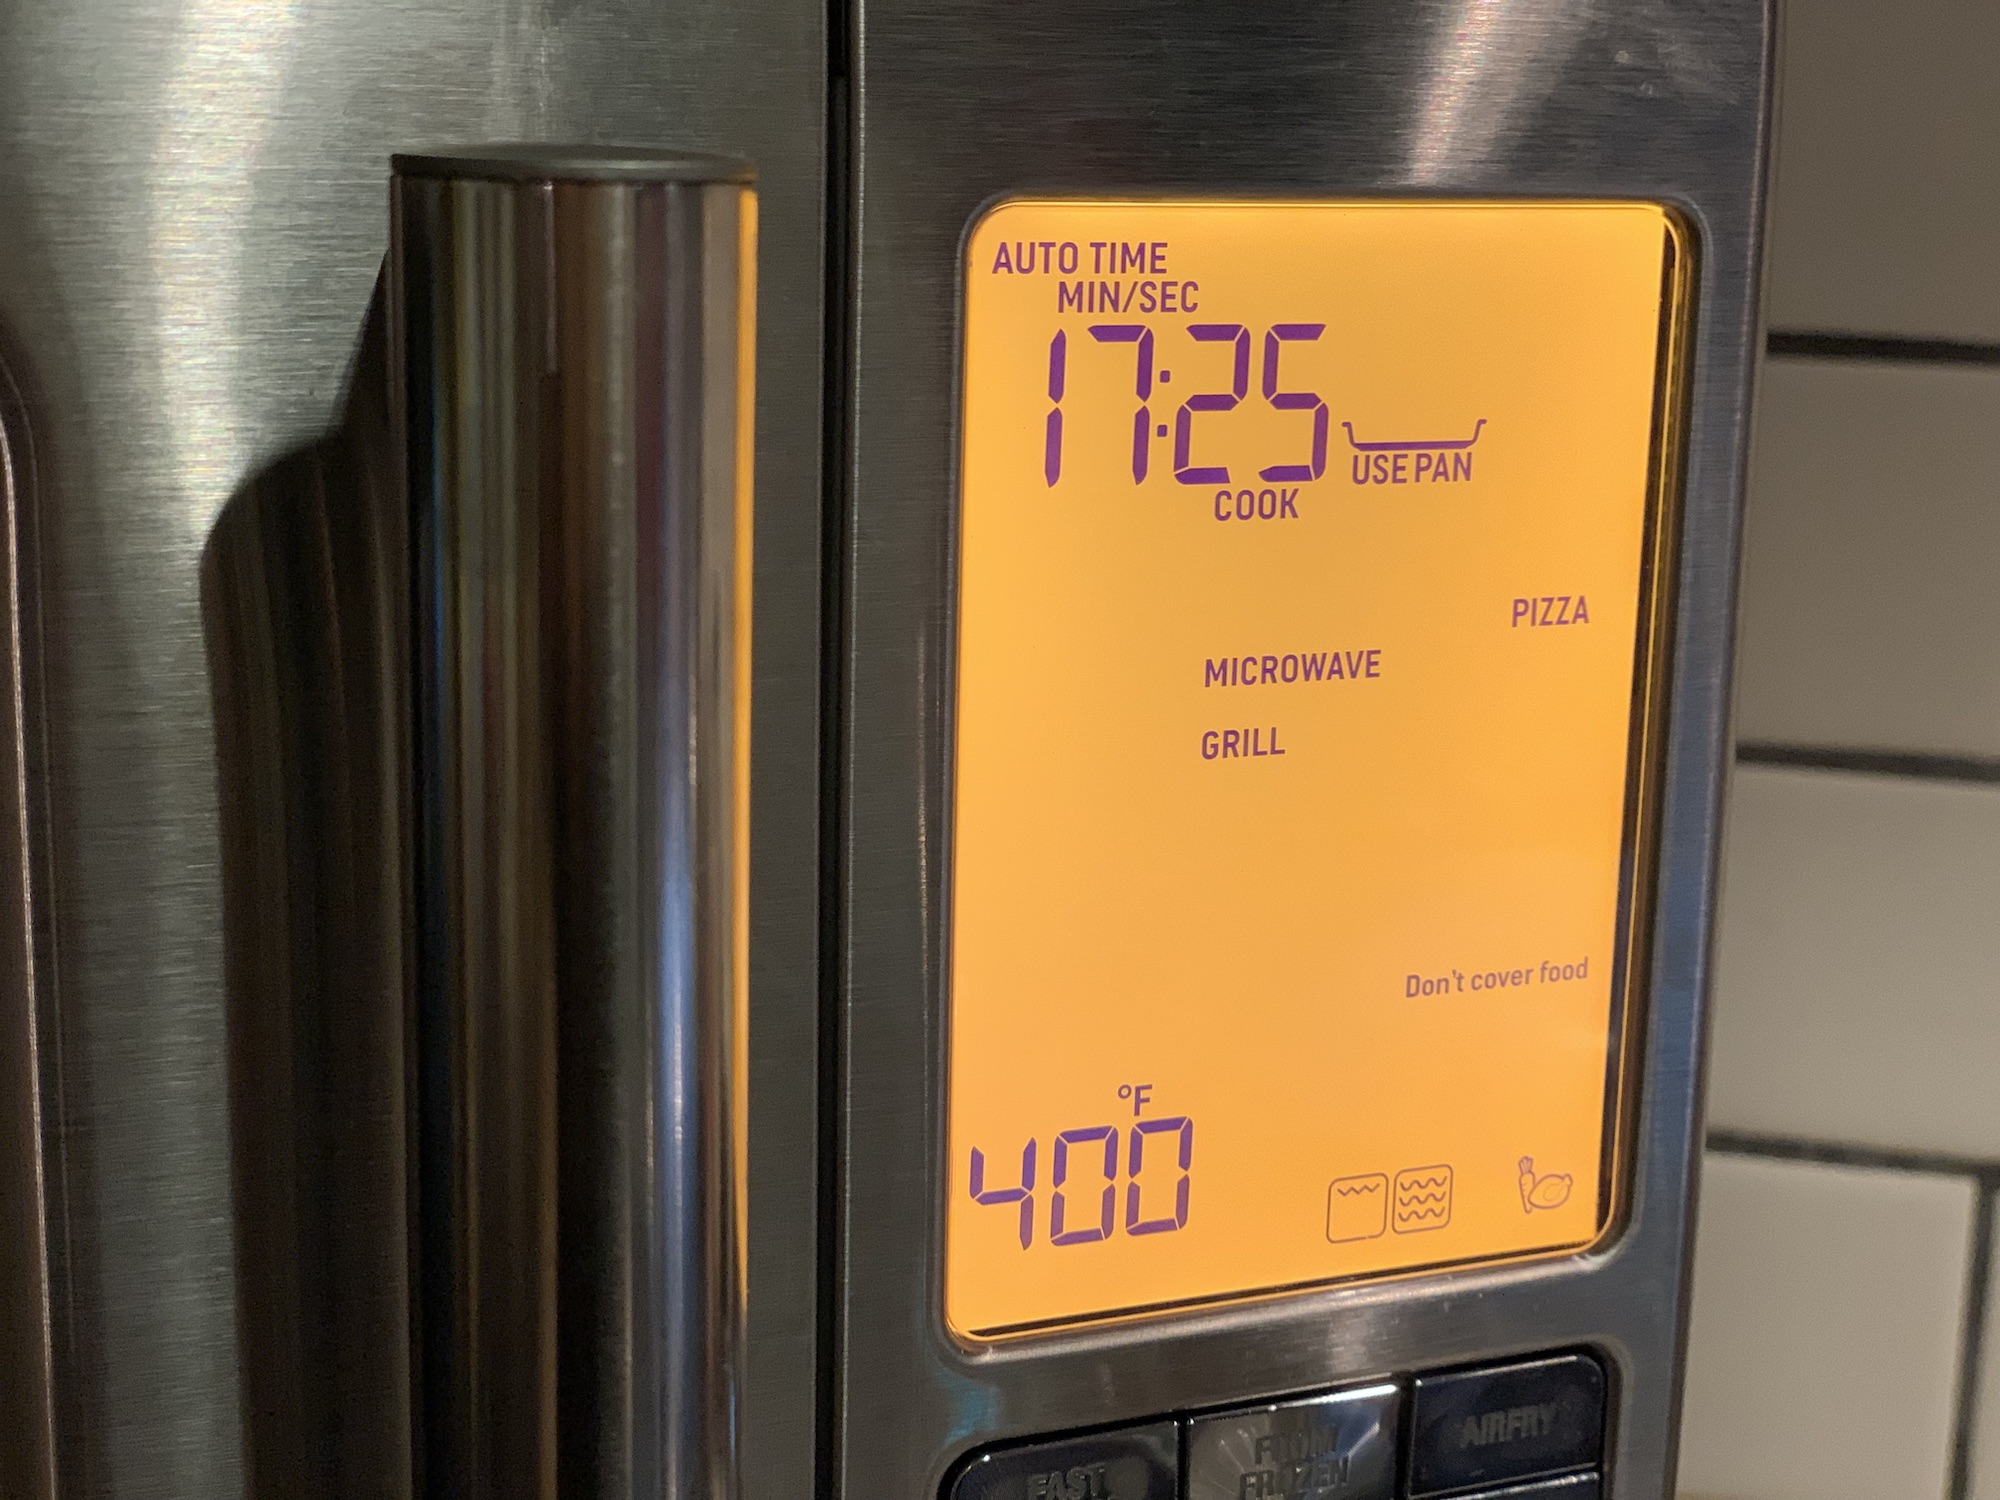 Breville 3-in-1 convection and microwave